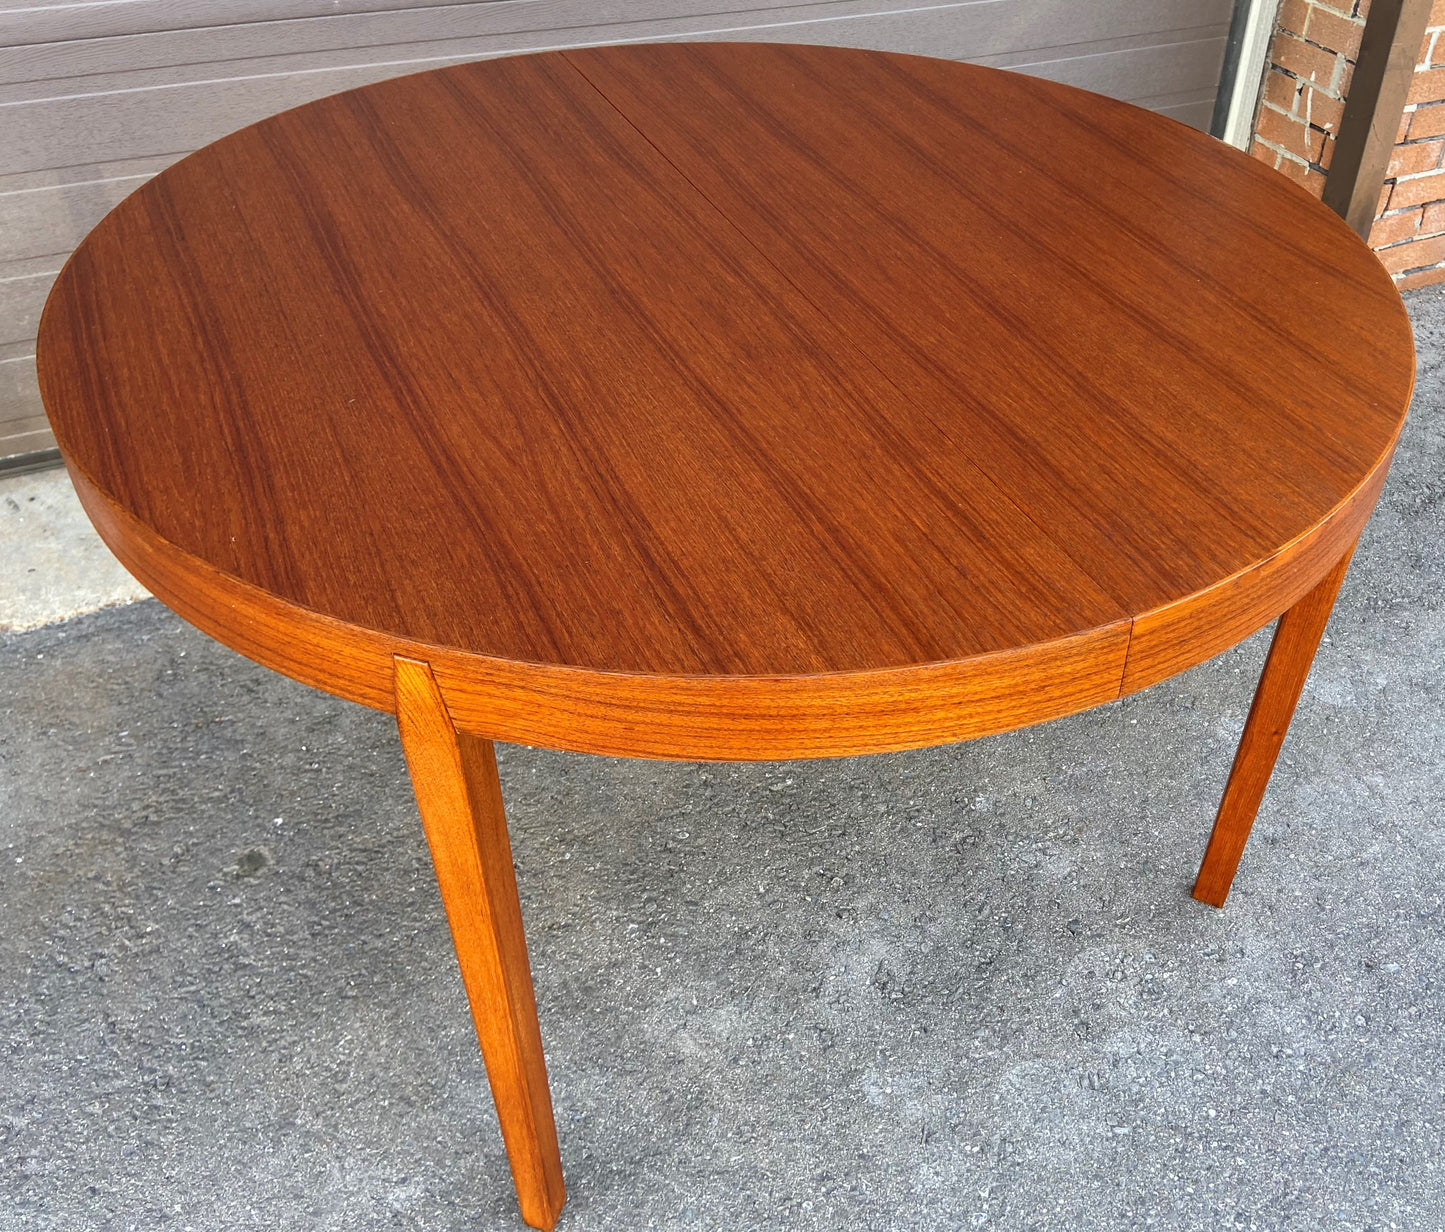 REFINISHED Danish Mid Century Modern Teak Table 47"-71" Round to Oval by N. Koefoed